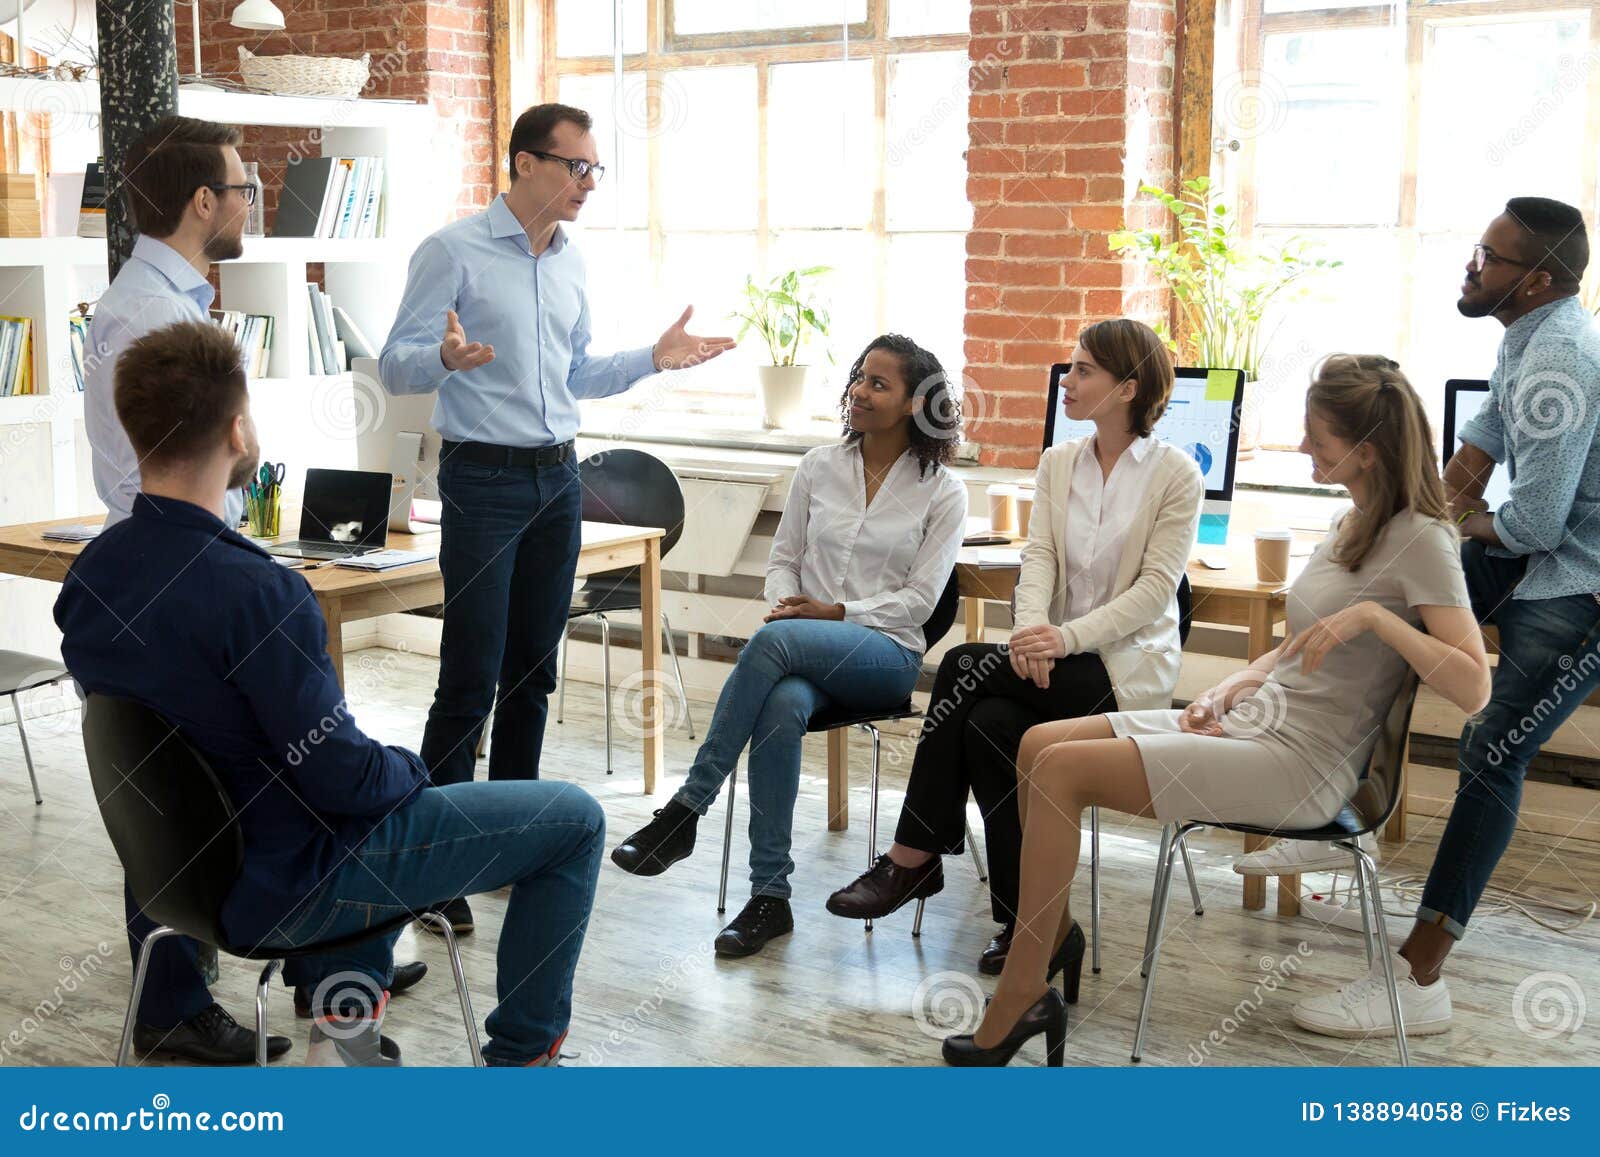 diverse employees listening to male manager speaking at group meeting